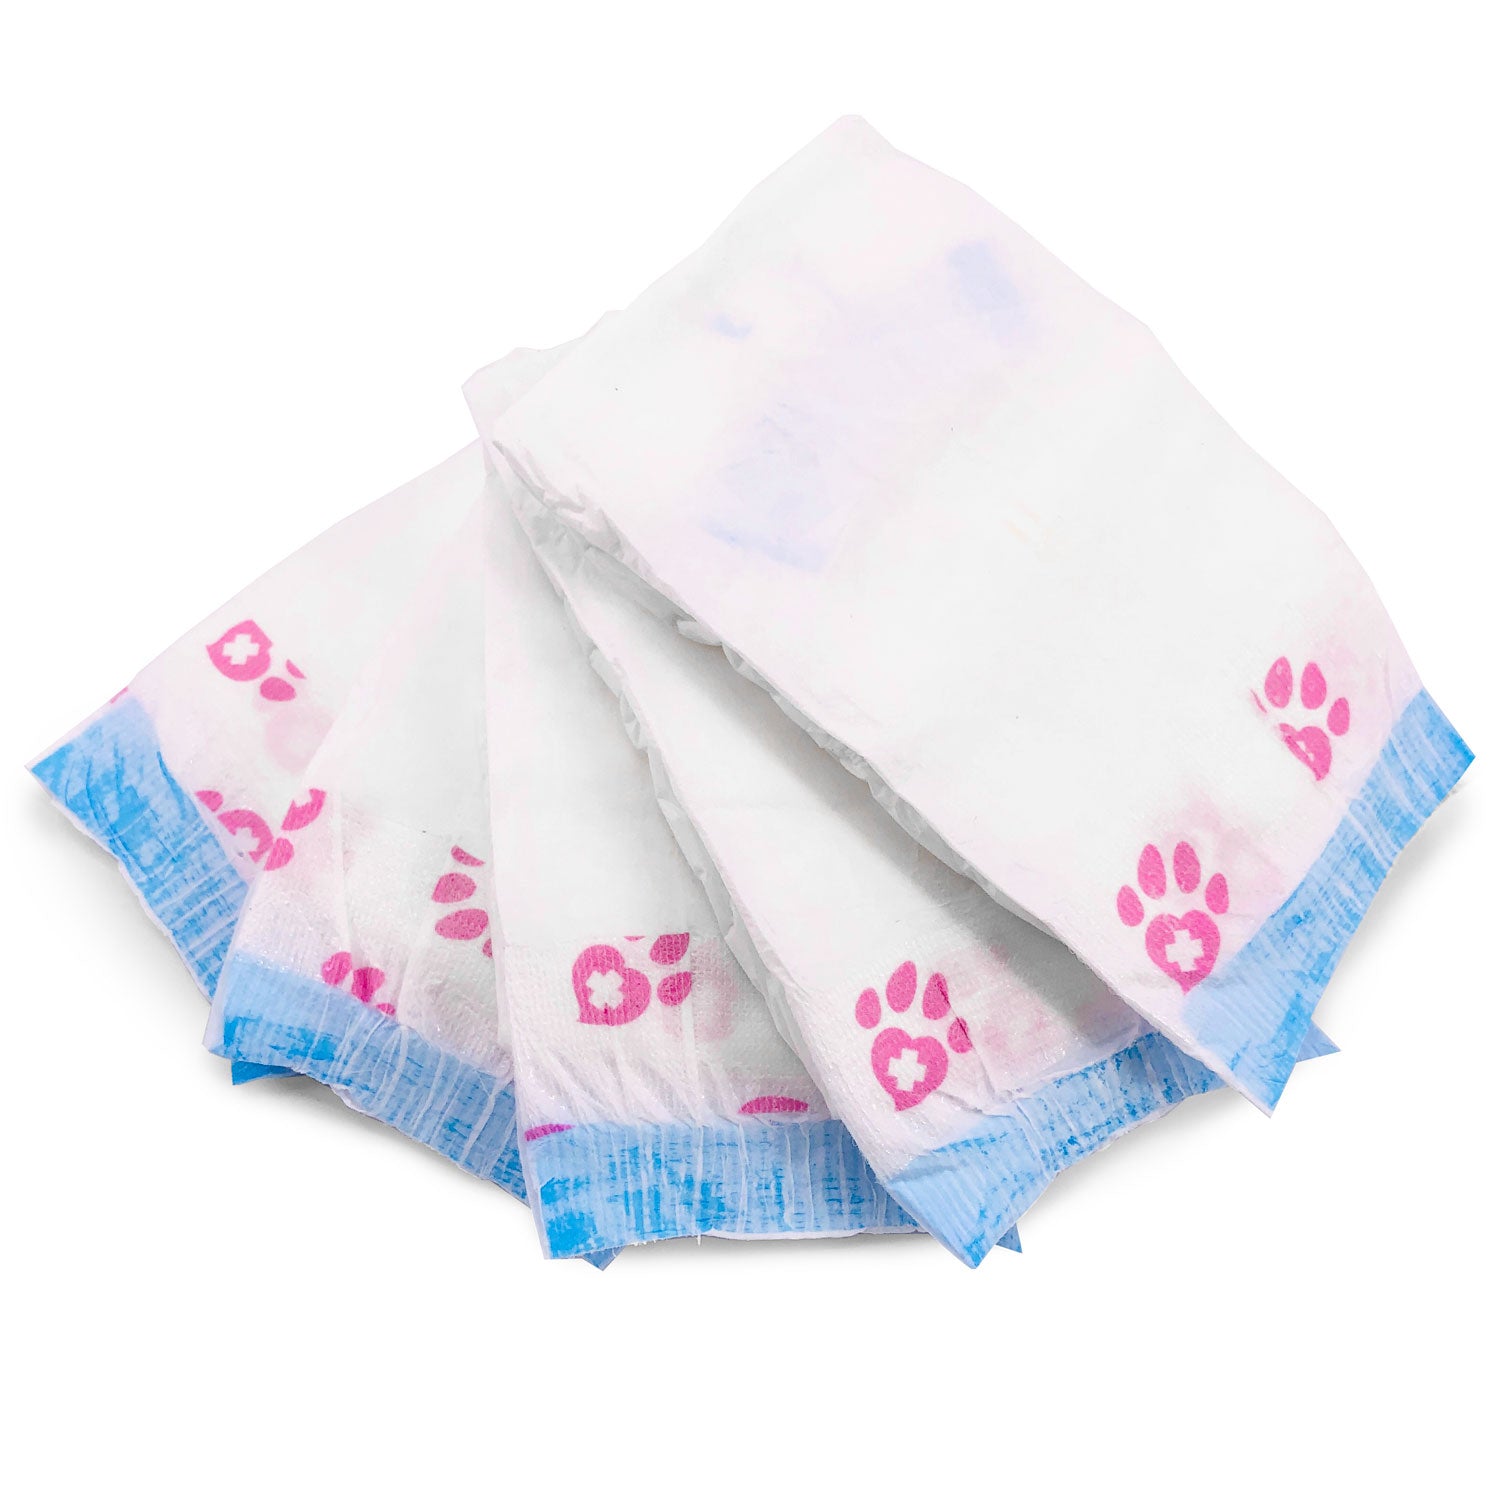 ValueFresh Female Dog Disposable Diapers, Large/X-Large, 576 Count WHOLESALE PACK